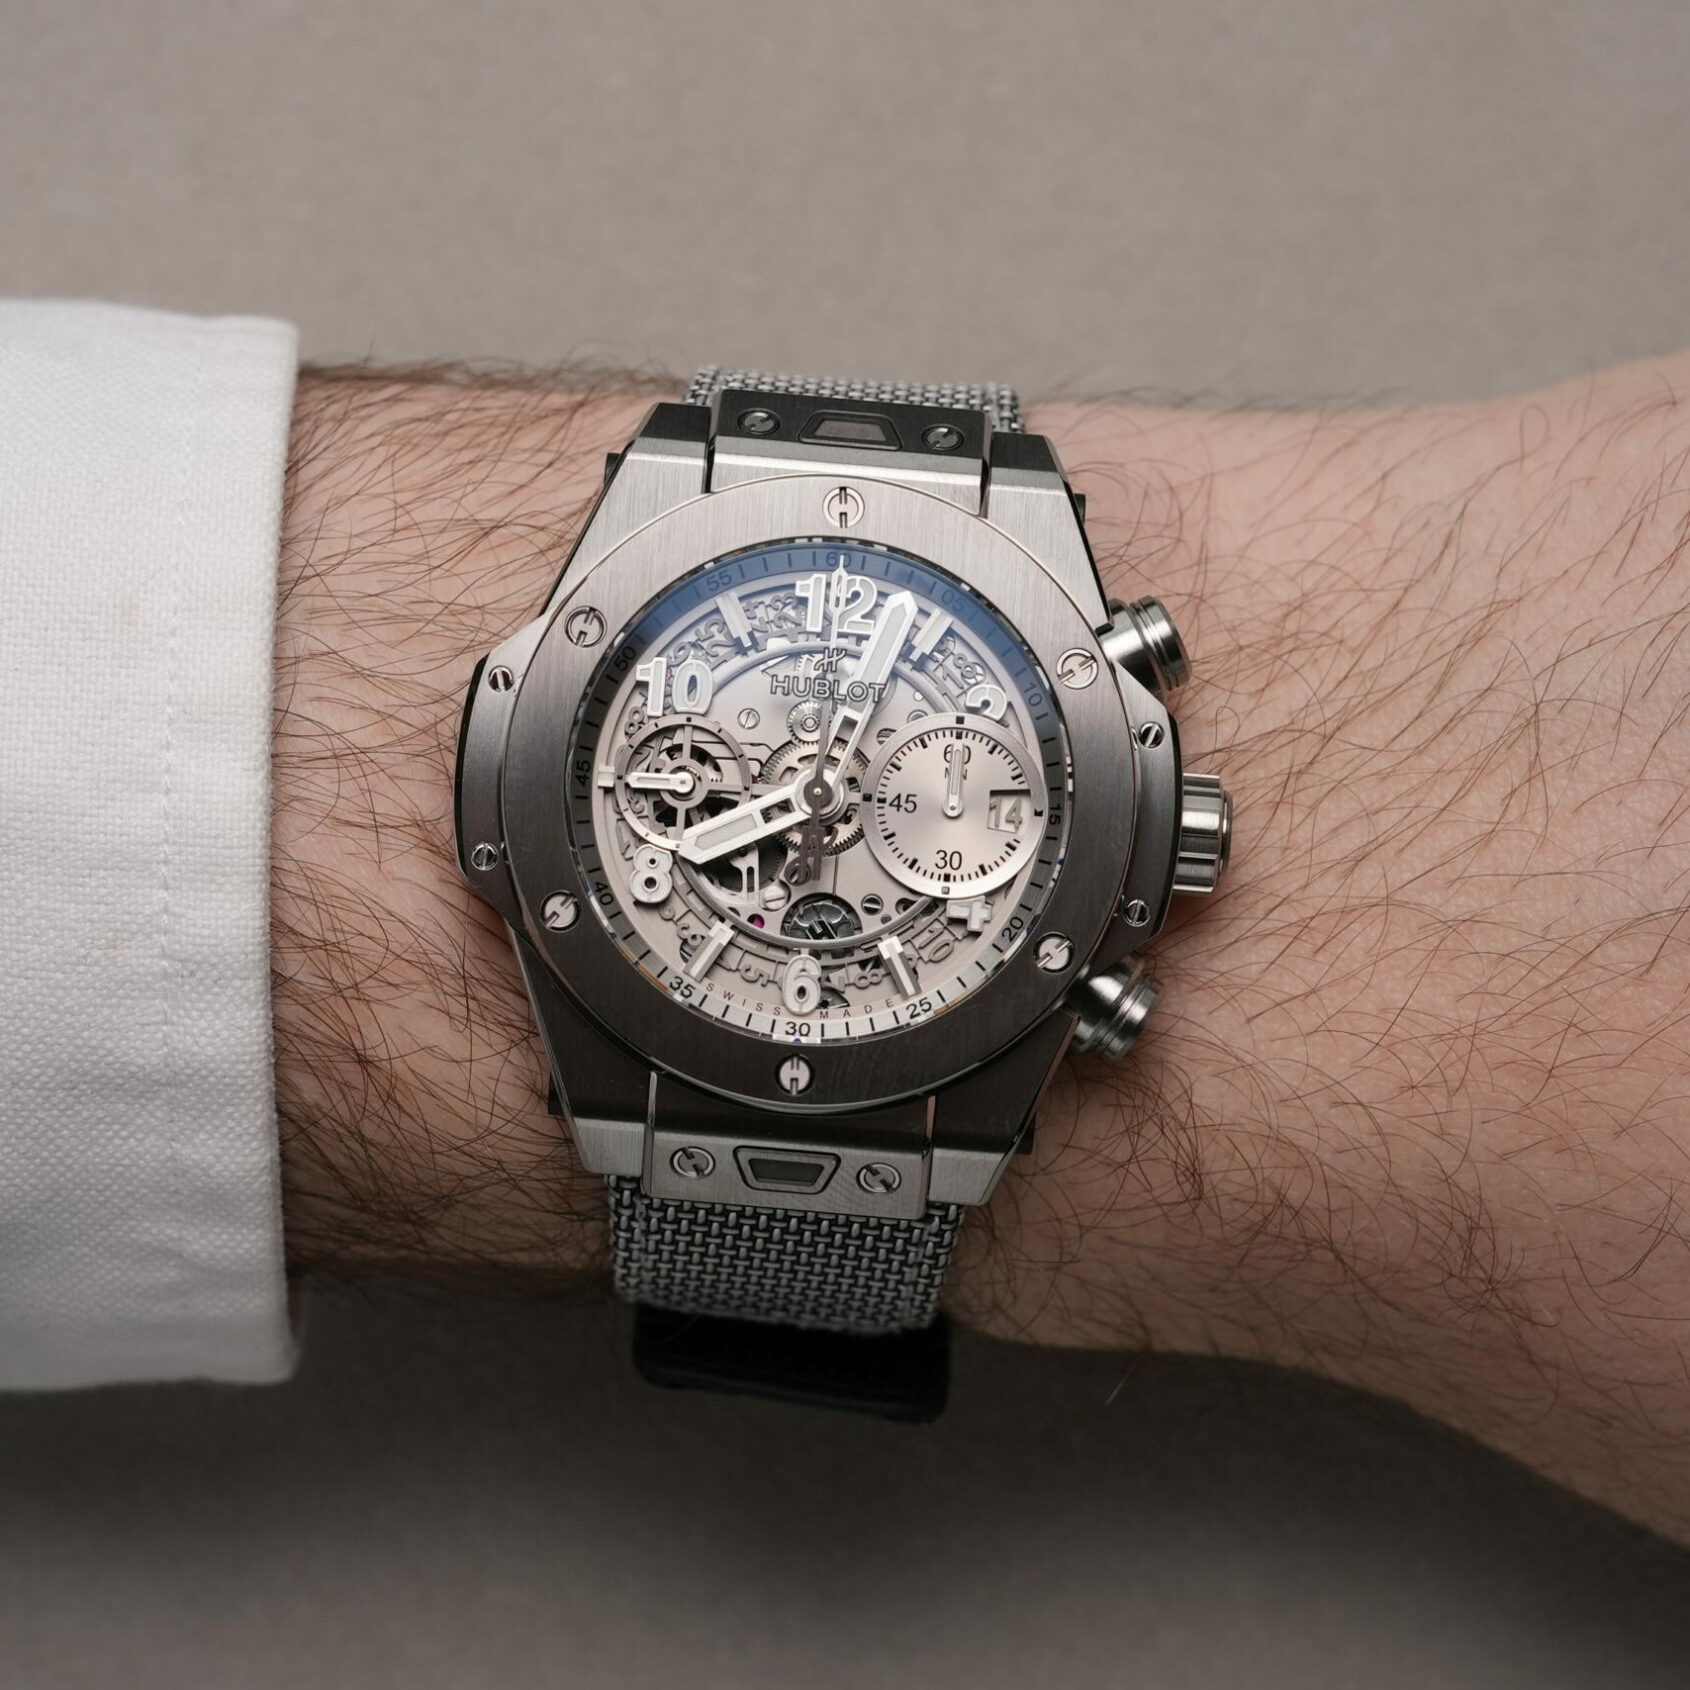 HANDS-ON: The Hublot Big Bang Unico Essential Grey Limited Edition